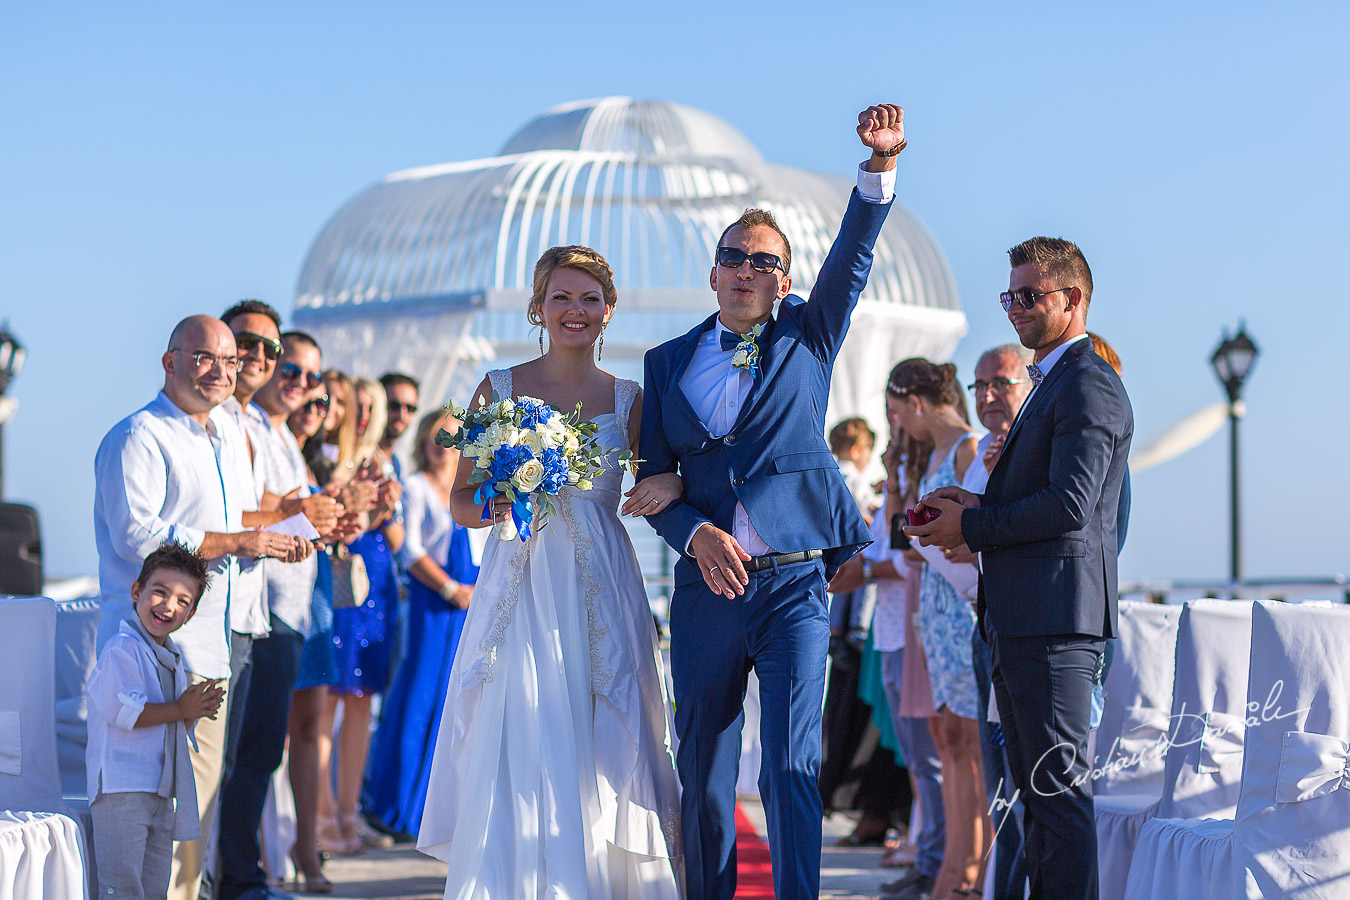 Just seconds after the ceremony, the groom is showing his enthusiasm at Elias Beach Hotel in Limassol